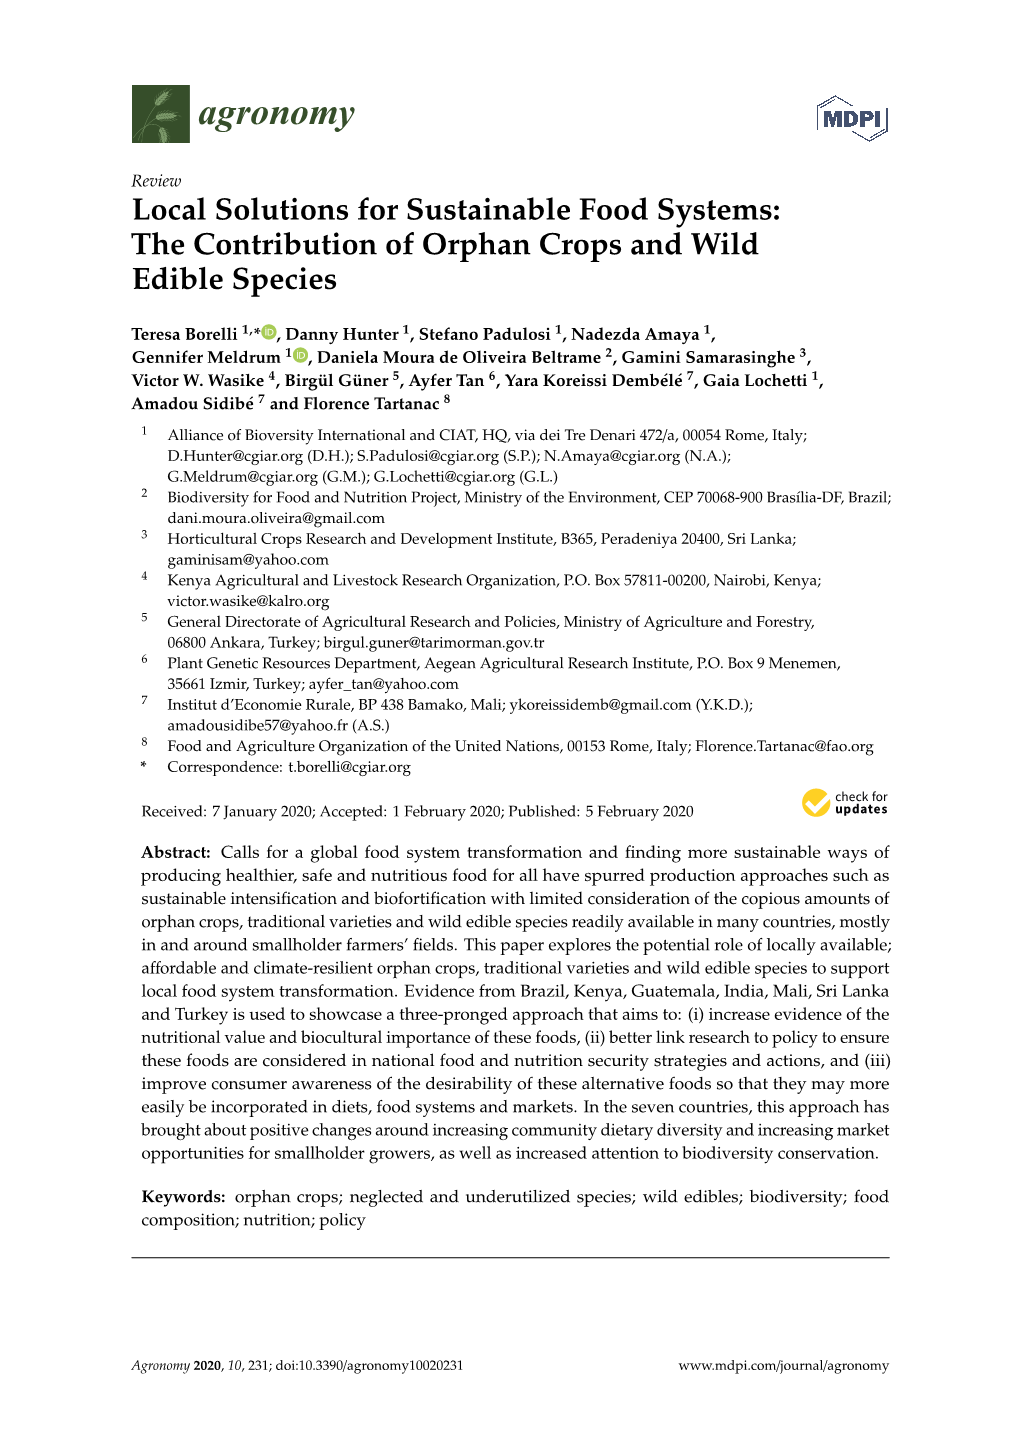 Local Solutions for Sustainable Food Systems: the Contribution of Orphan Crops and Wild Edible Species